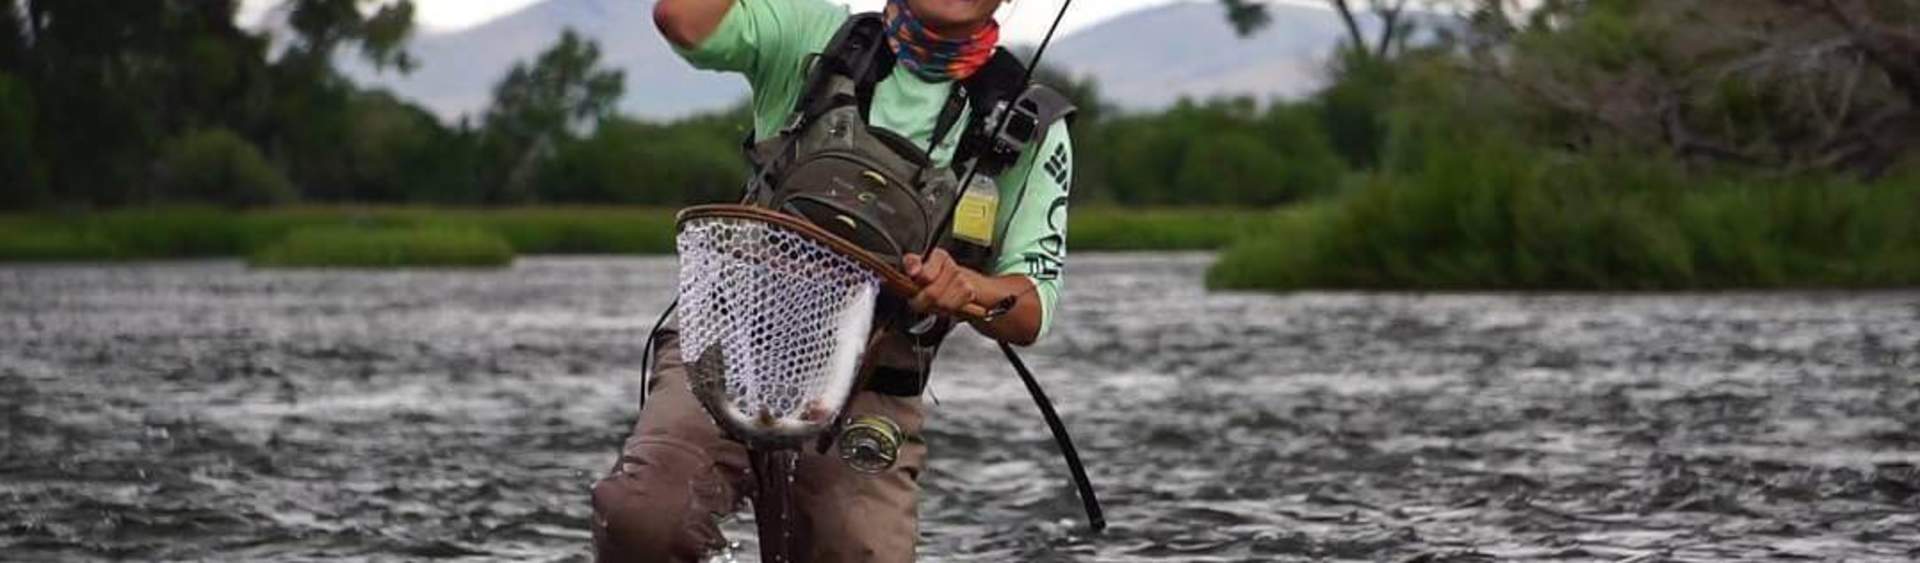 World's best Fly Fishing. Gallatin River in Big Sky Montana. 